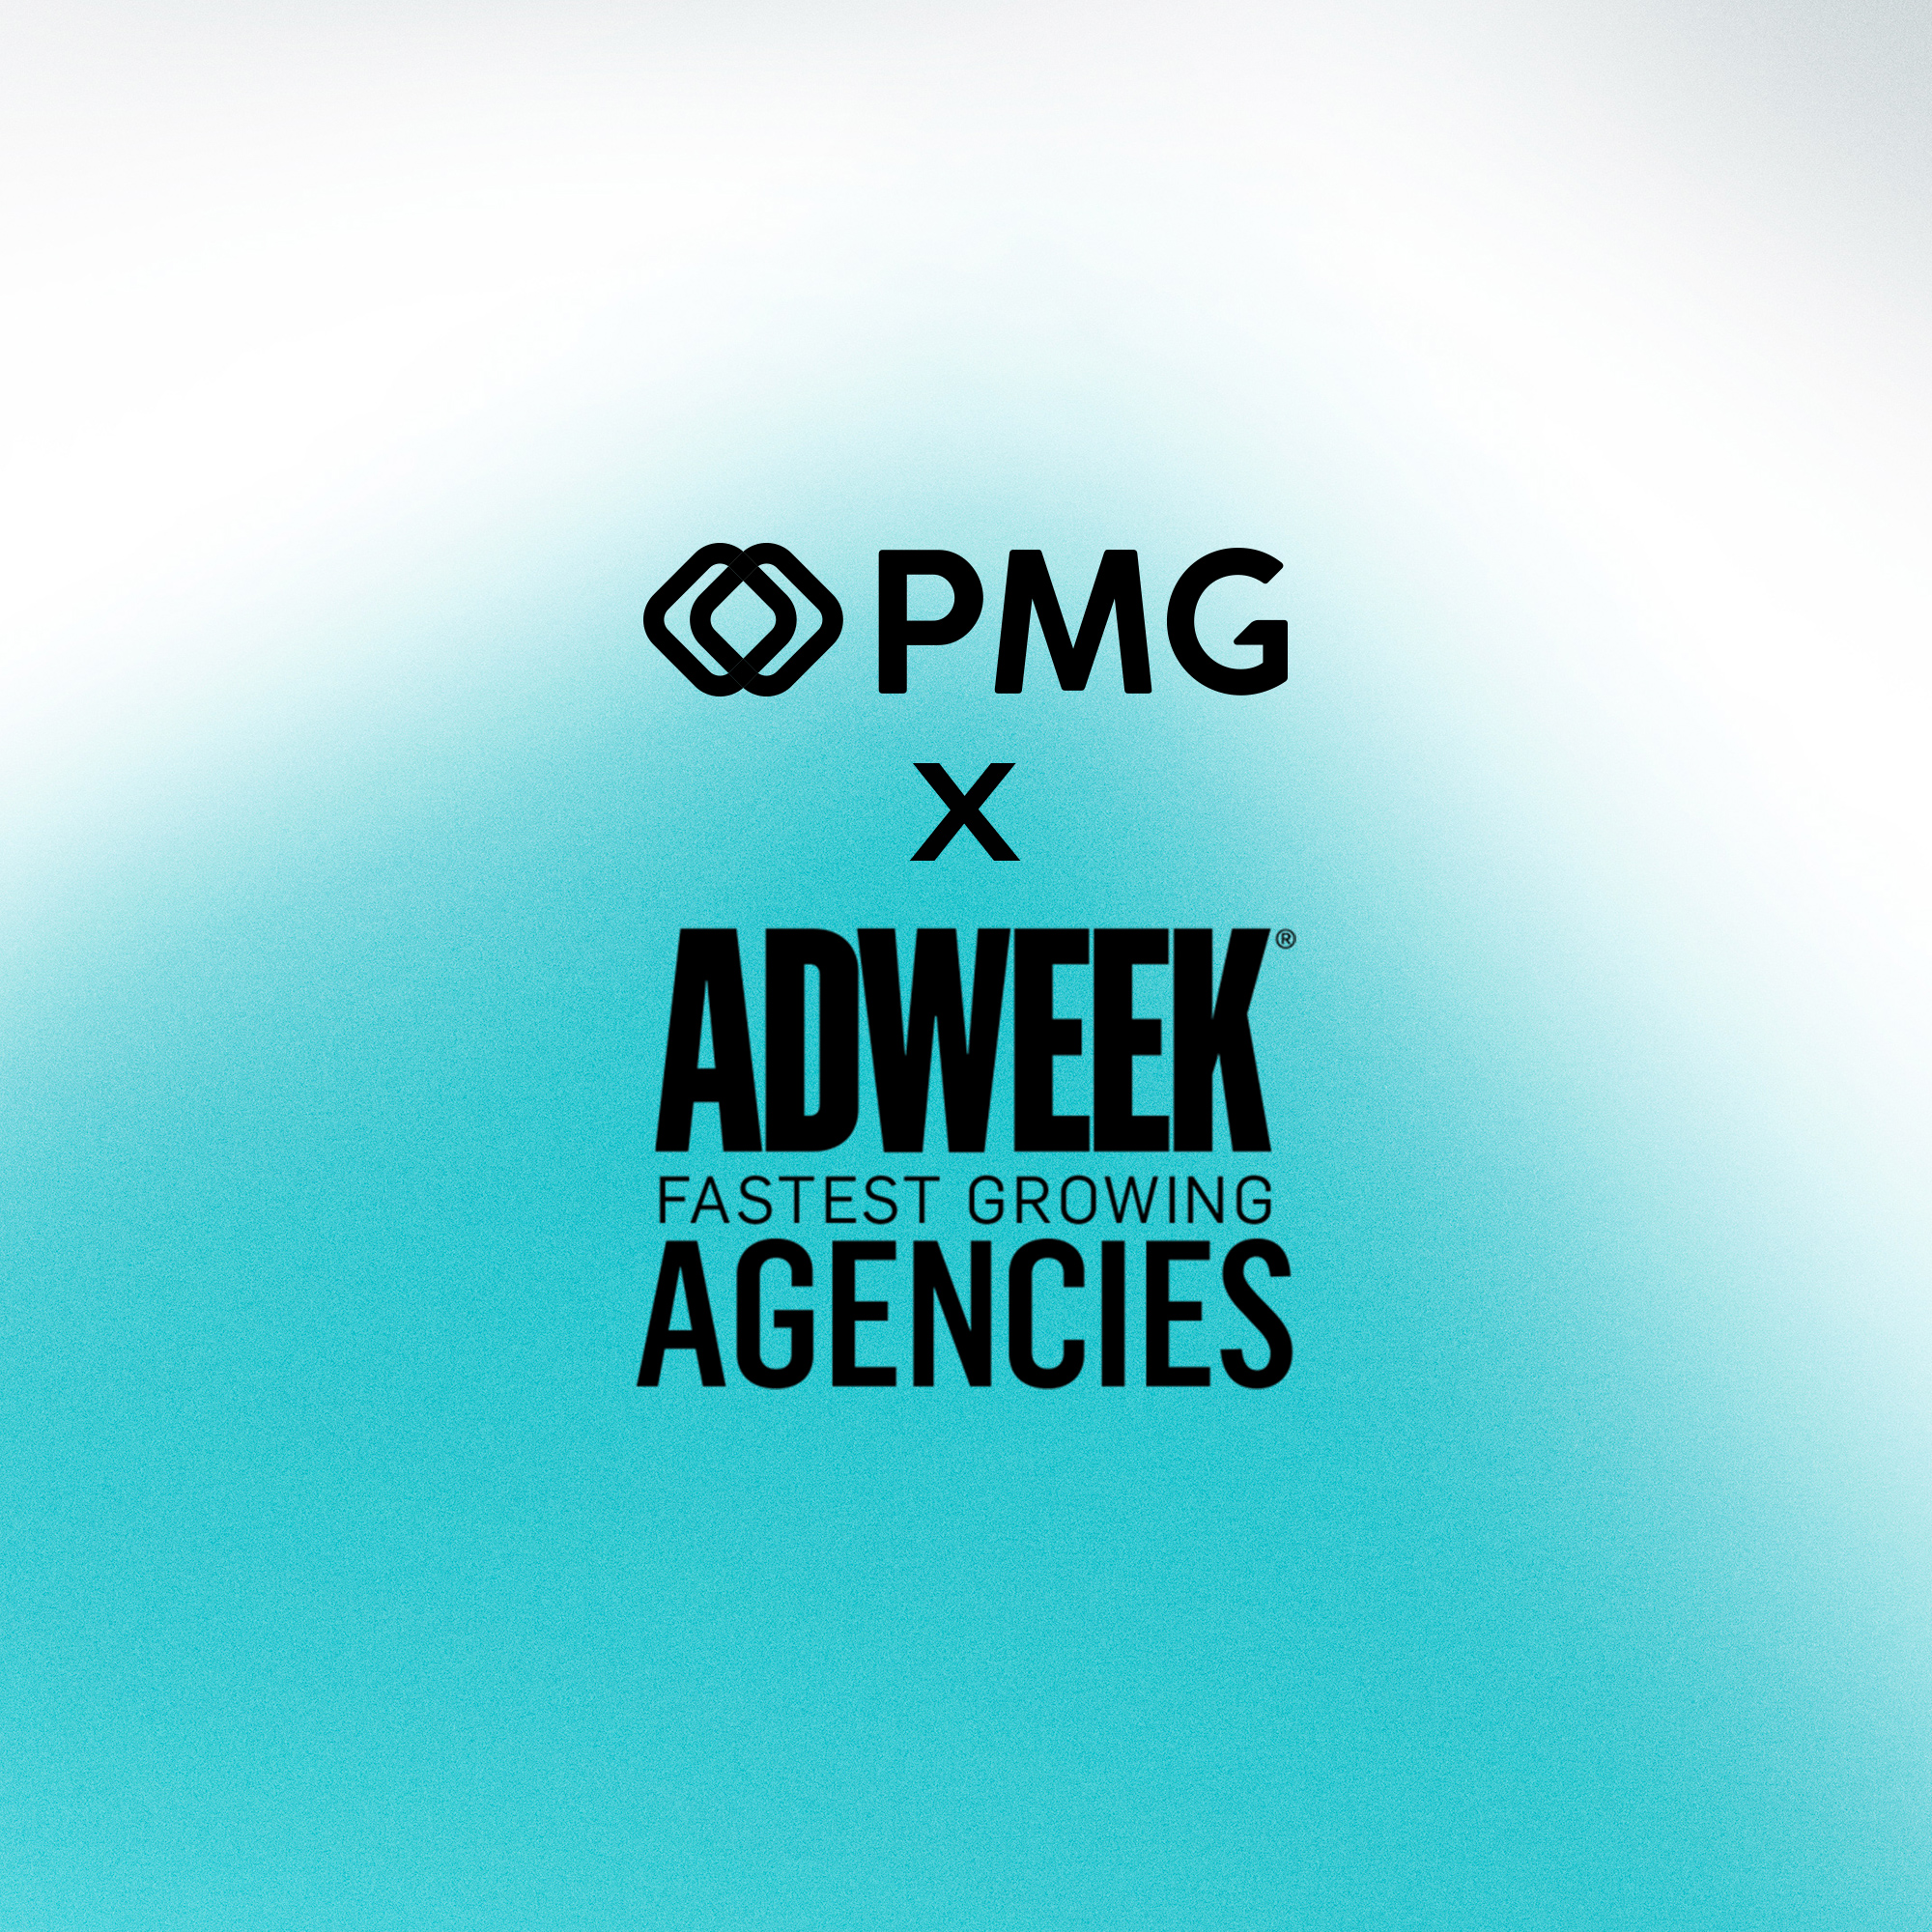 PMG Among Adweek’s Fastest Growing Companies for Fifth Year